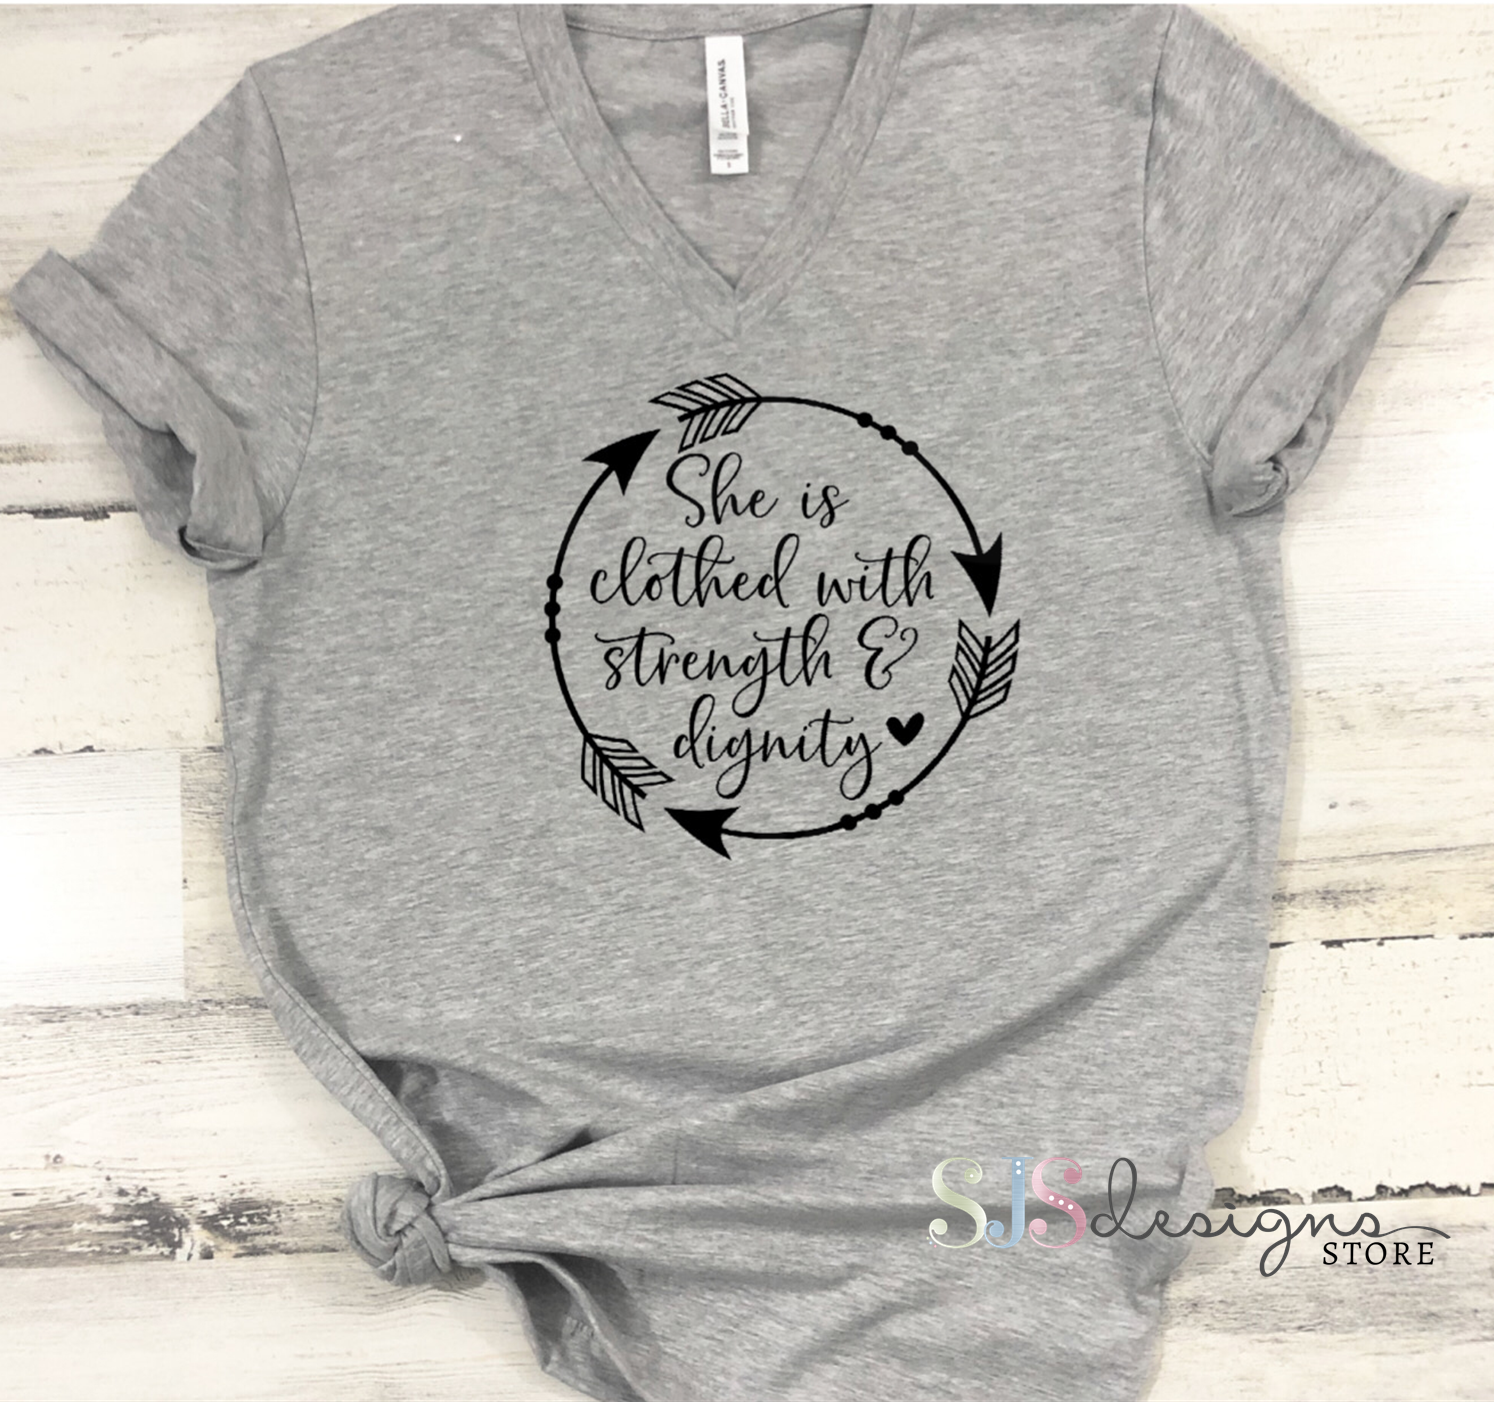 She is Clothed in Strength & Dignity Shirt